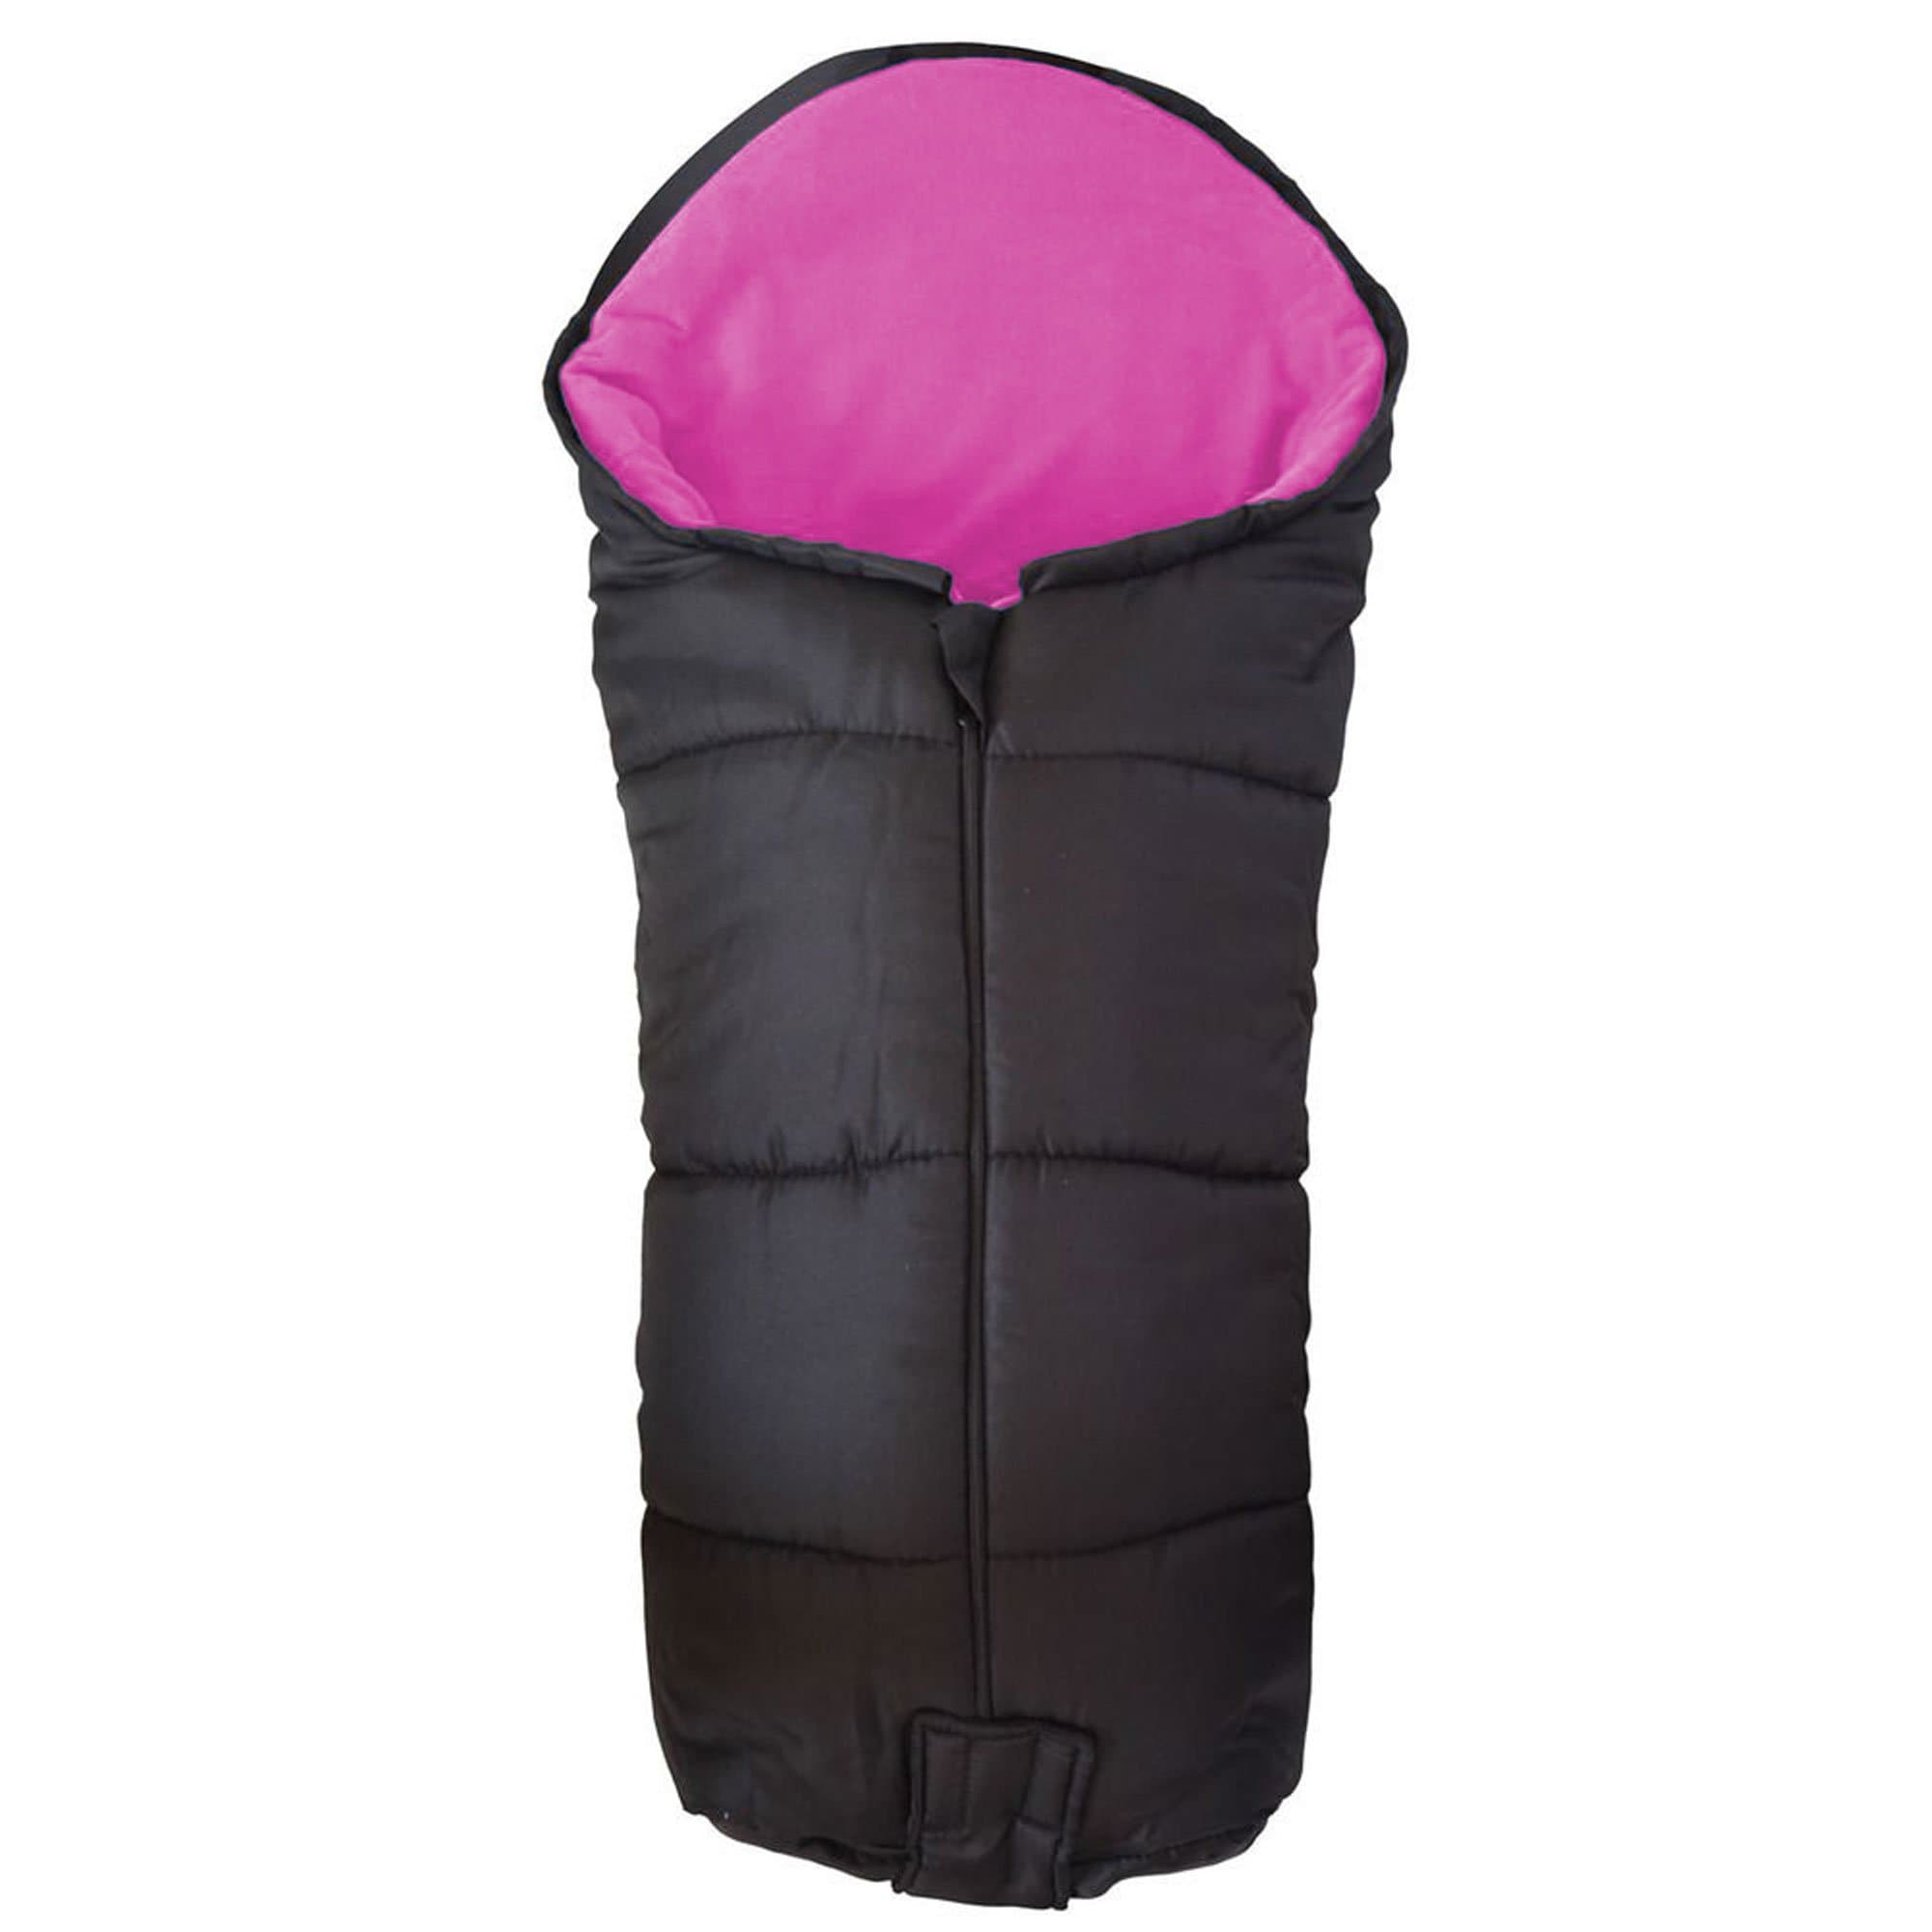 Universal Deluxe Pushchair Footmuff / Cosy Toes - Fits All Pushchairs / Prams And Buggies - Pink / Fits All Models | For Your Little One